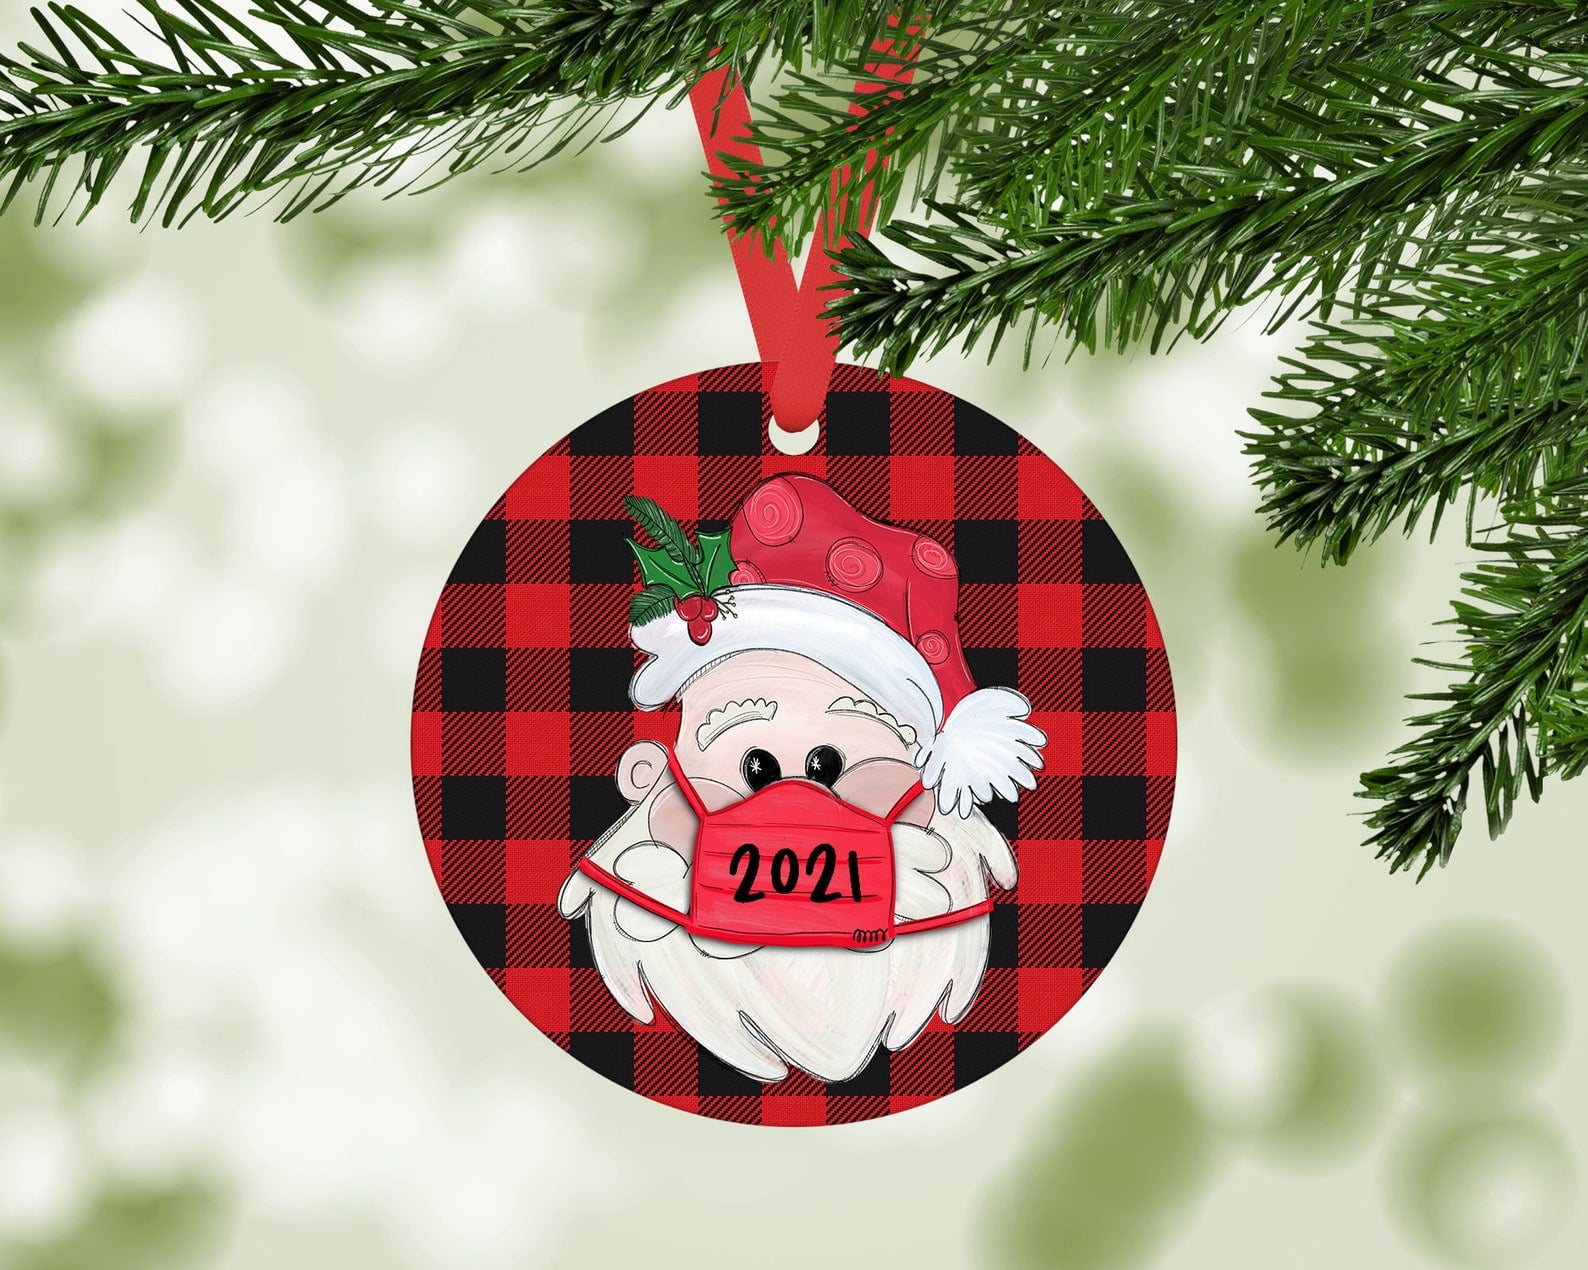 Customize Mask Off Christmas Ornament 2021 Mask Off Christmas 2021 Family Christmas Ornaments Masked Ornaments 2021 Pandemic Ornaments